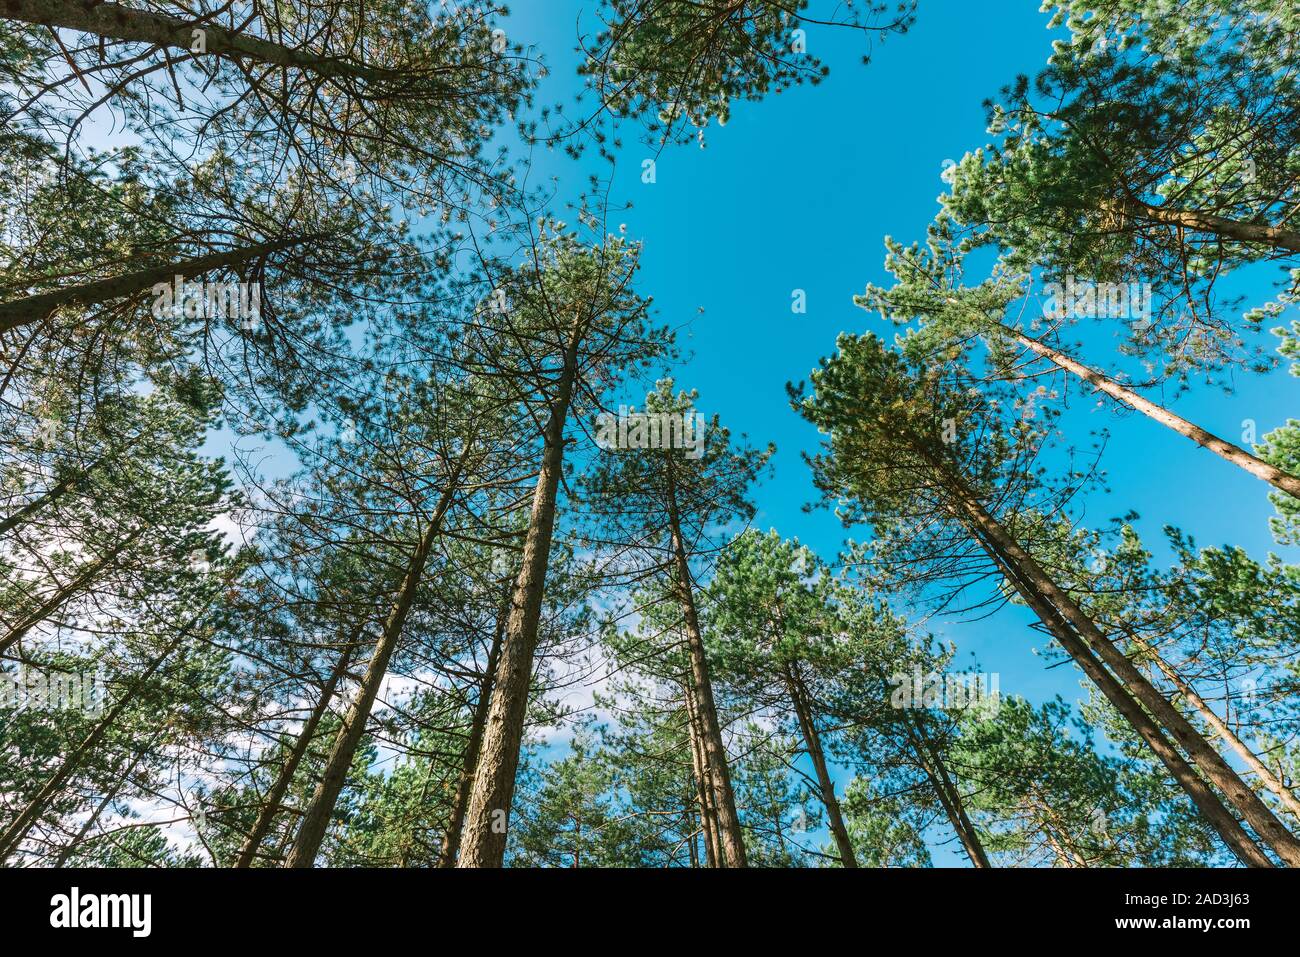 Tall pine trees, low angle view of evergreen forest in autumn Stock Photo